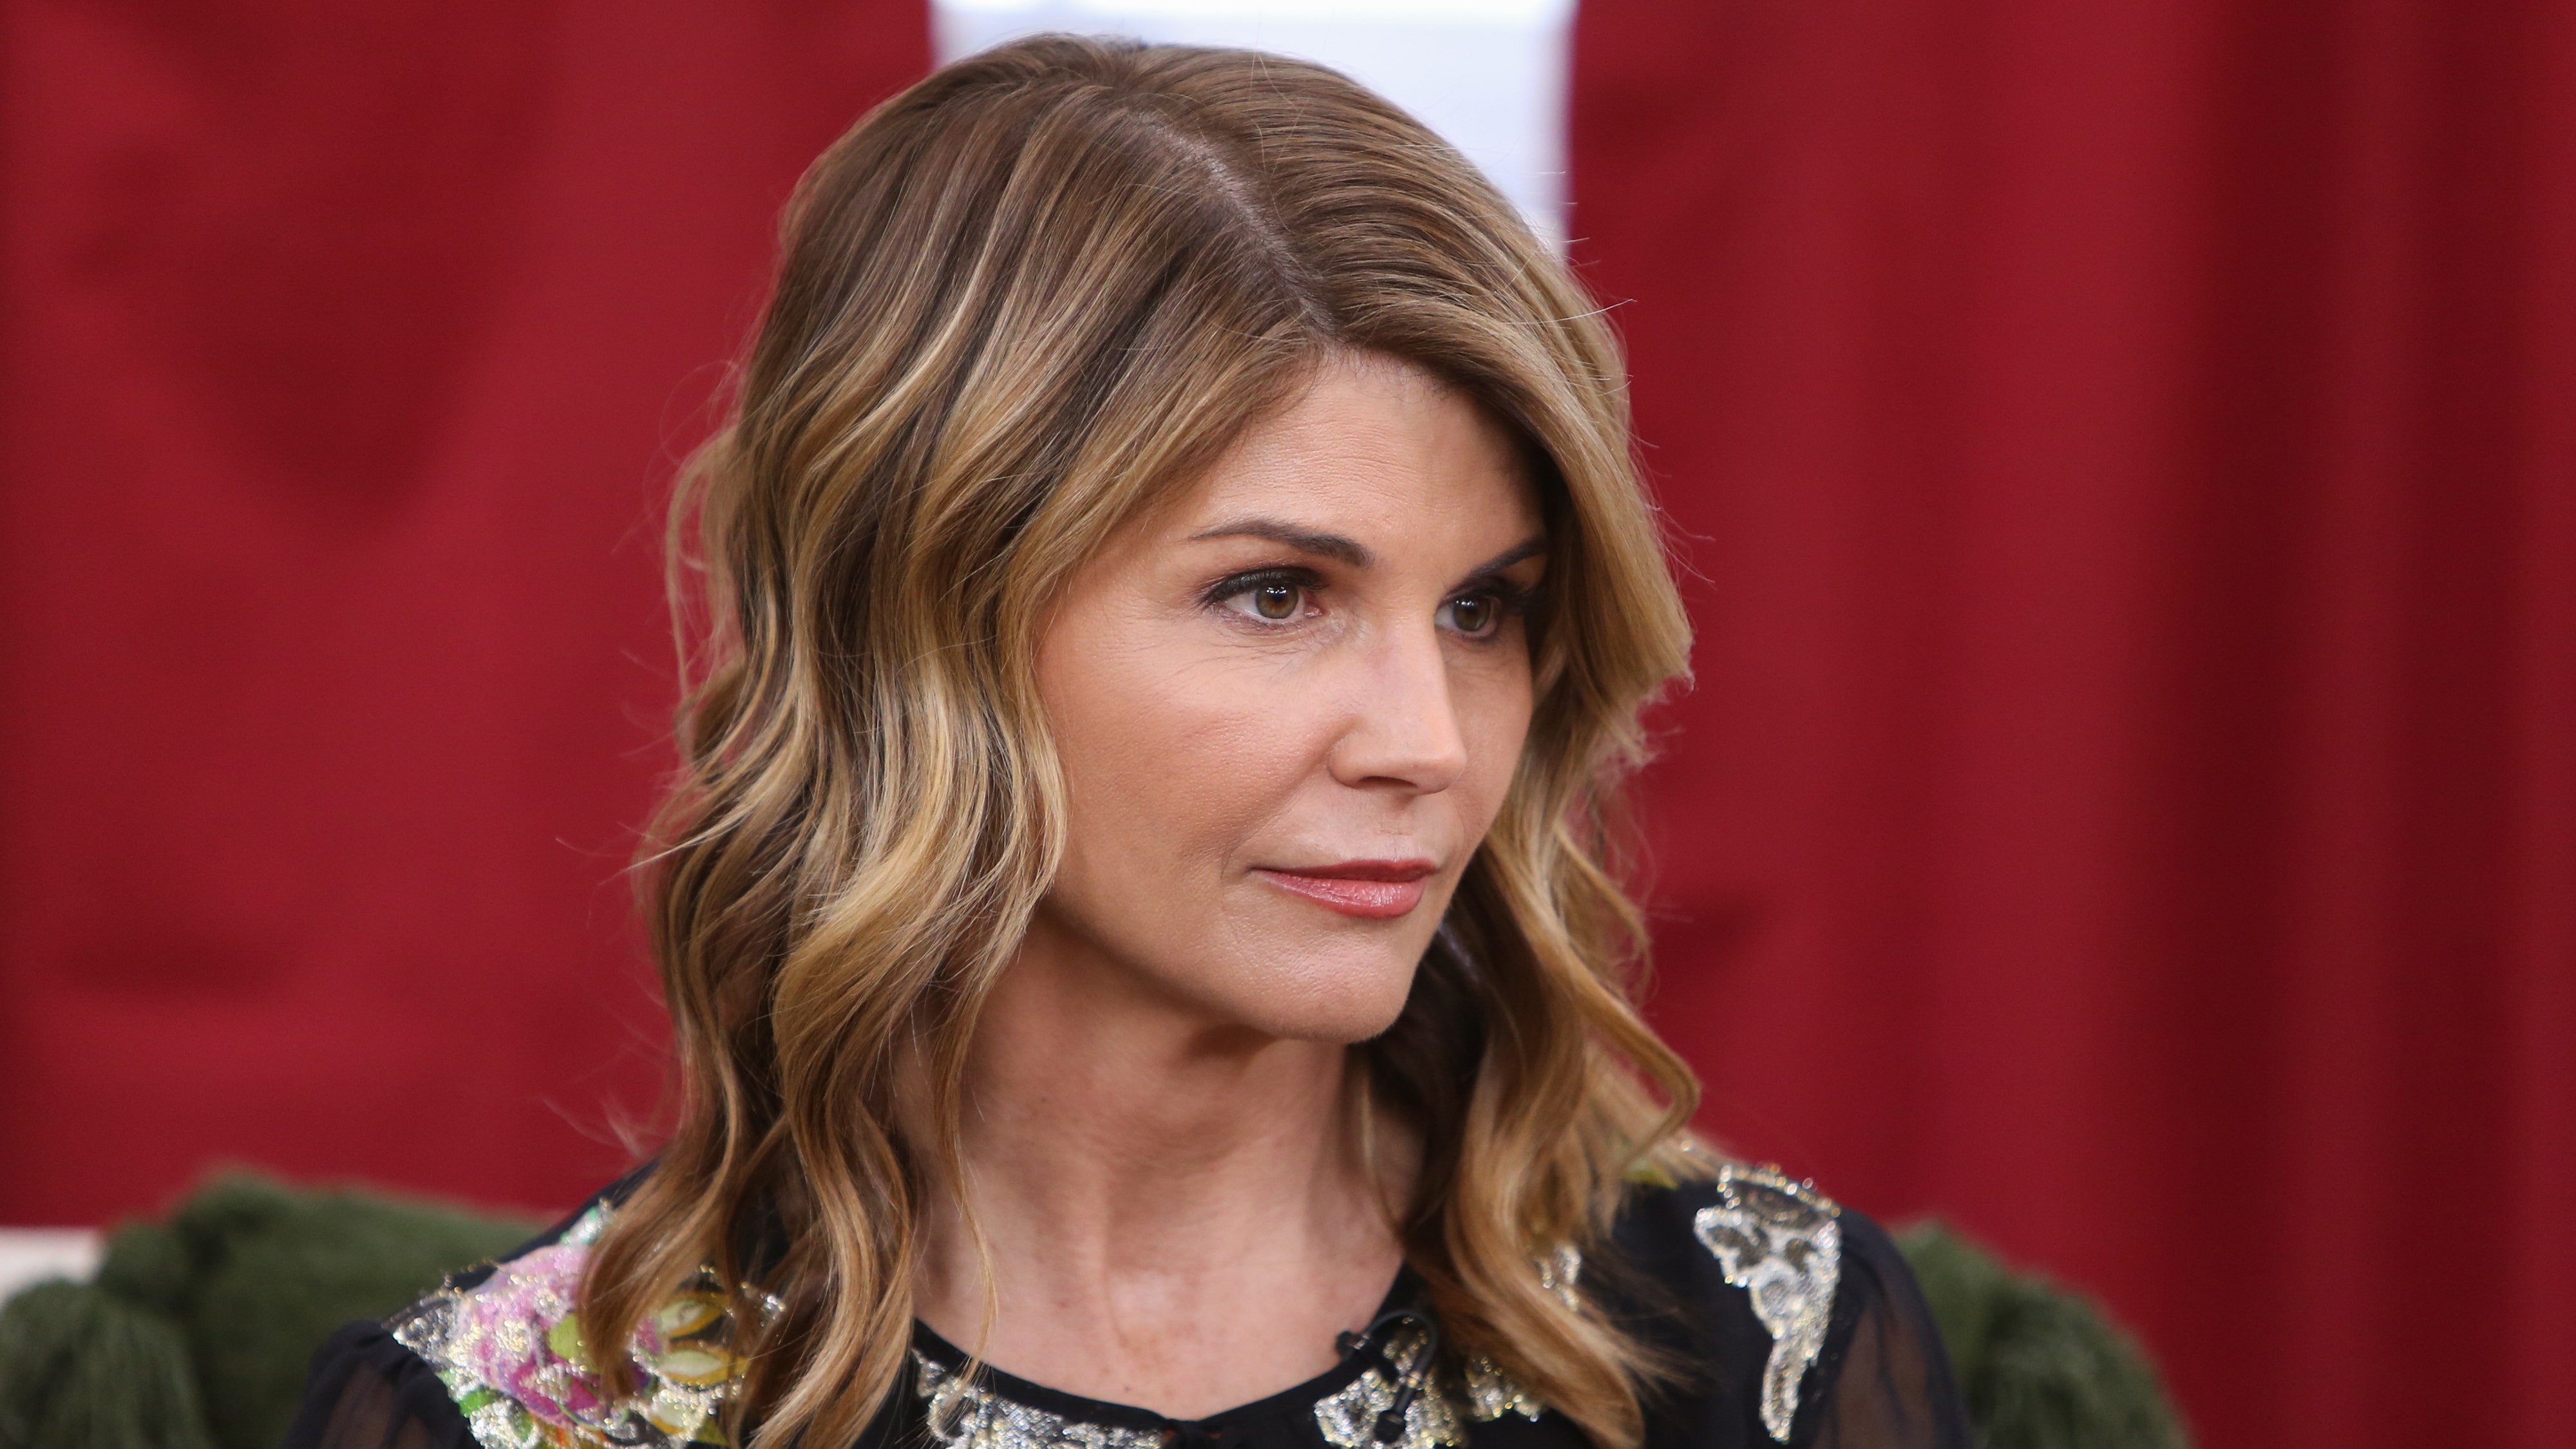 What’s next for Lori Loughlin after her release from prison?